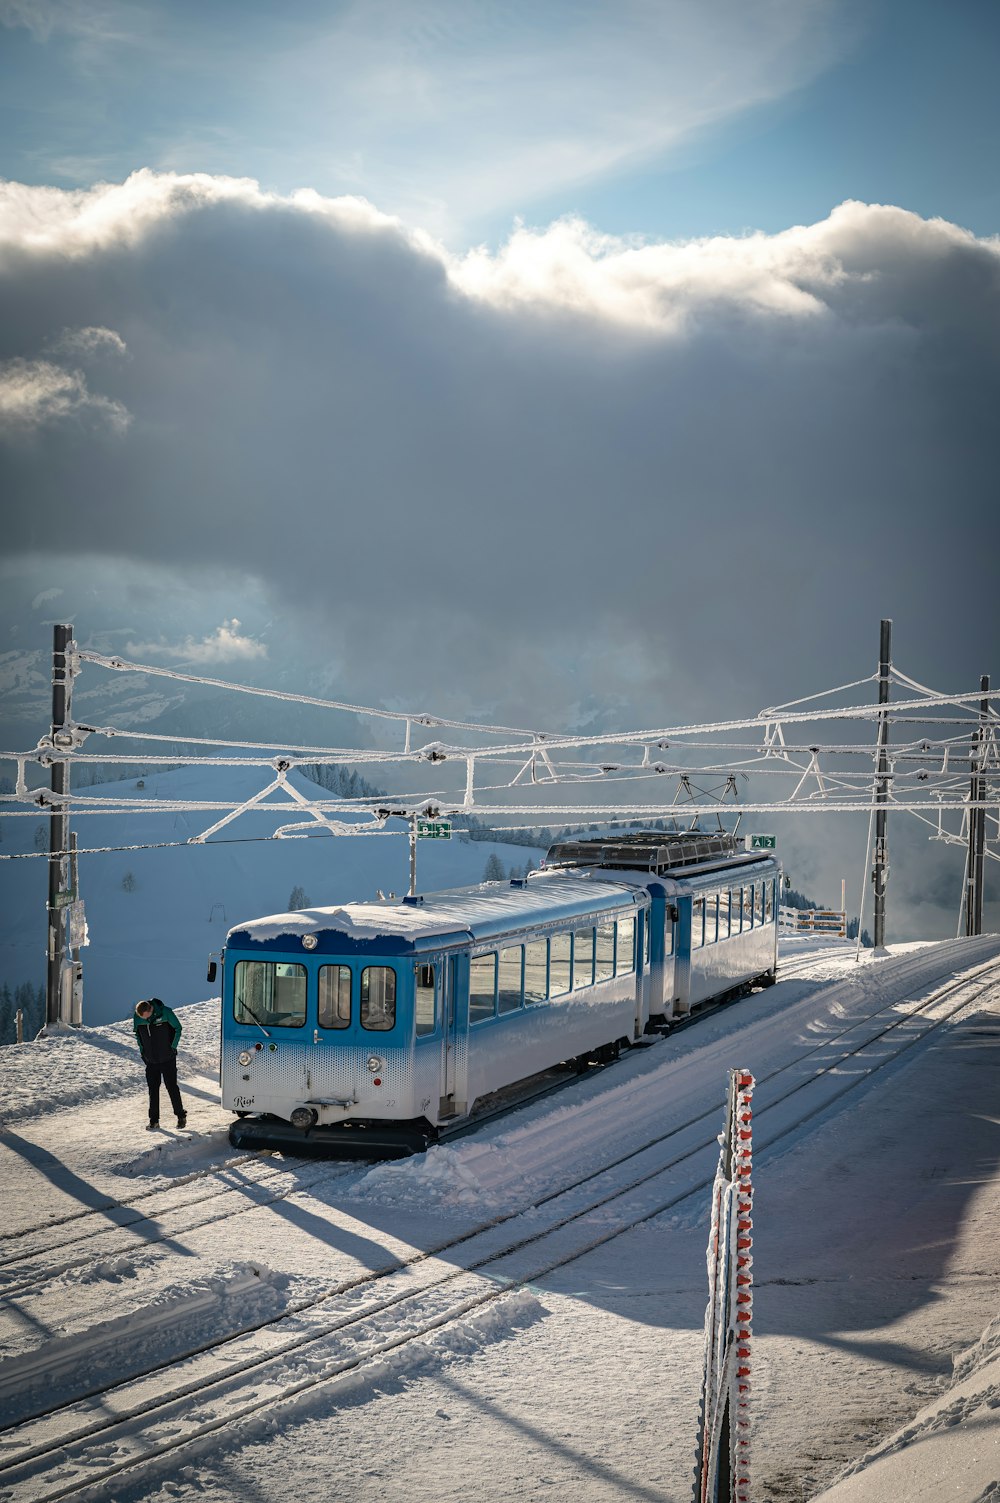 blue and white train on rail under cloudy sky during daytime